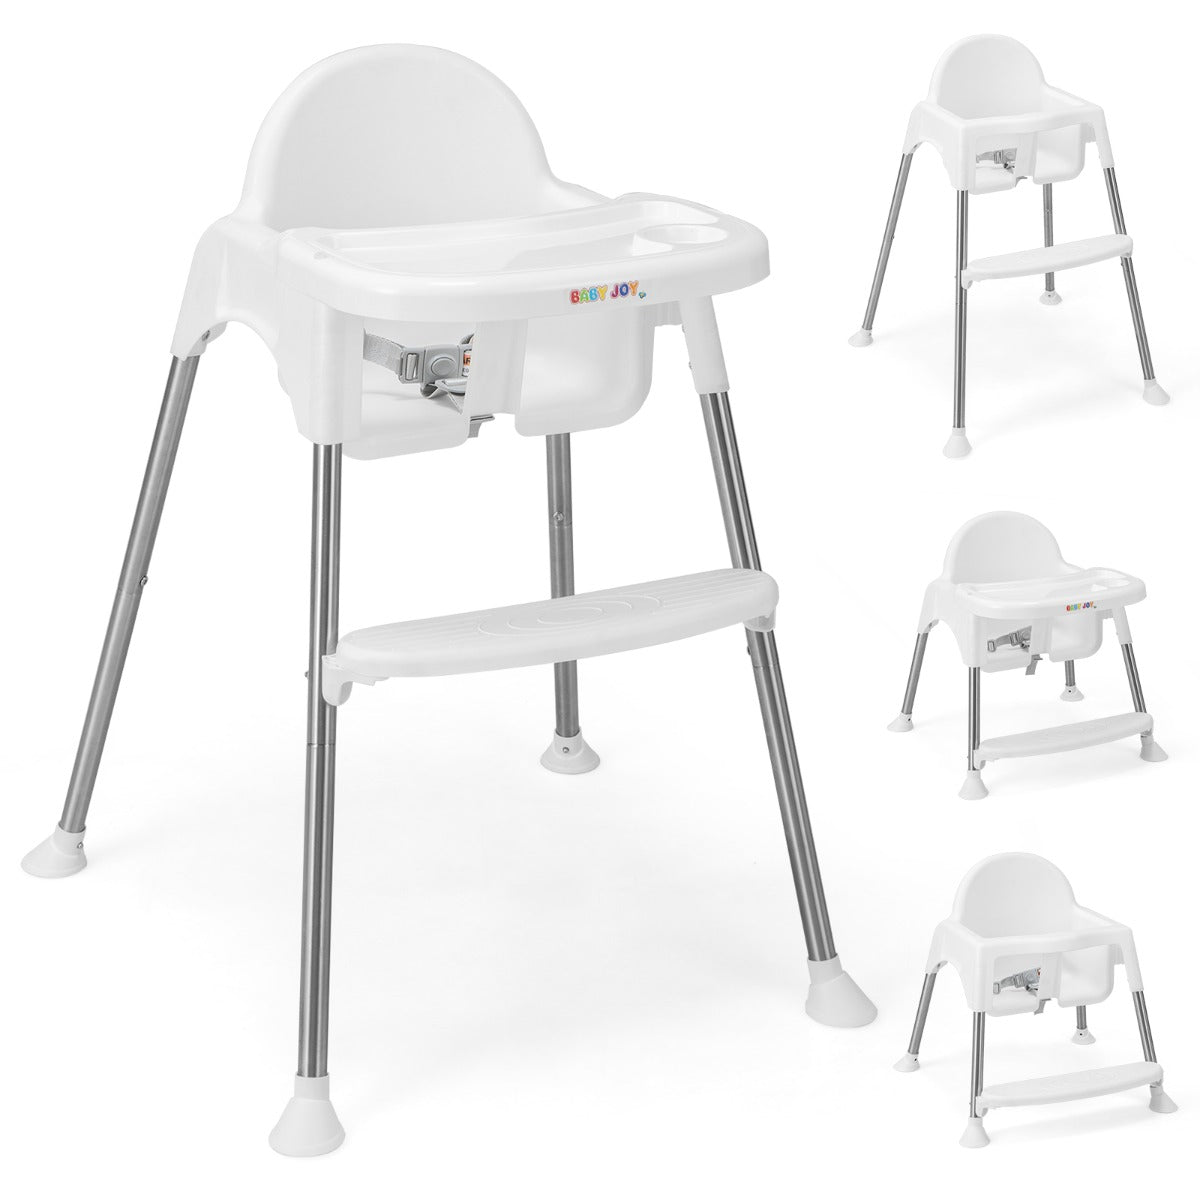 Shop White 4-in-1 Convertible Baby High Chair with Removable Tray